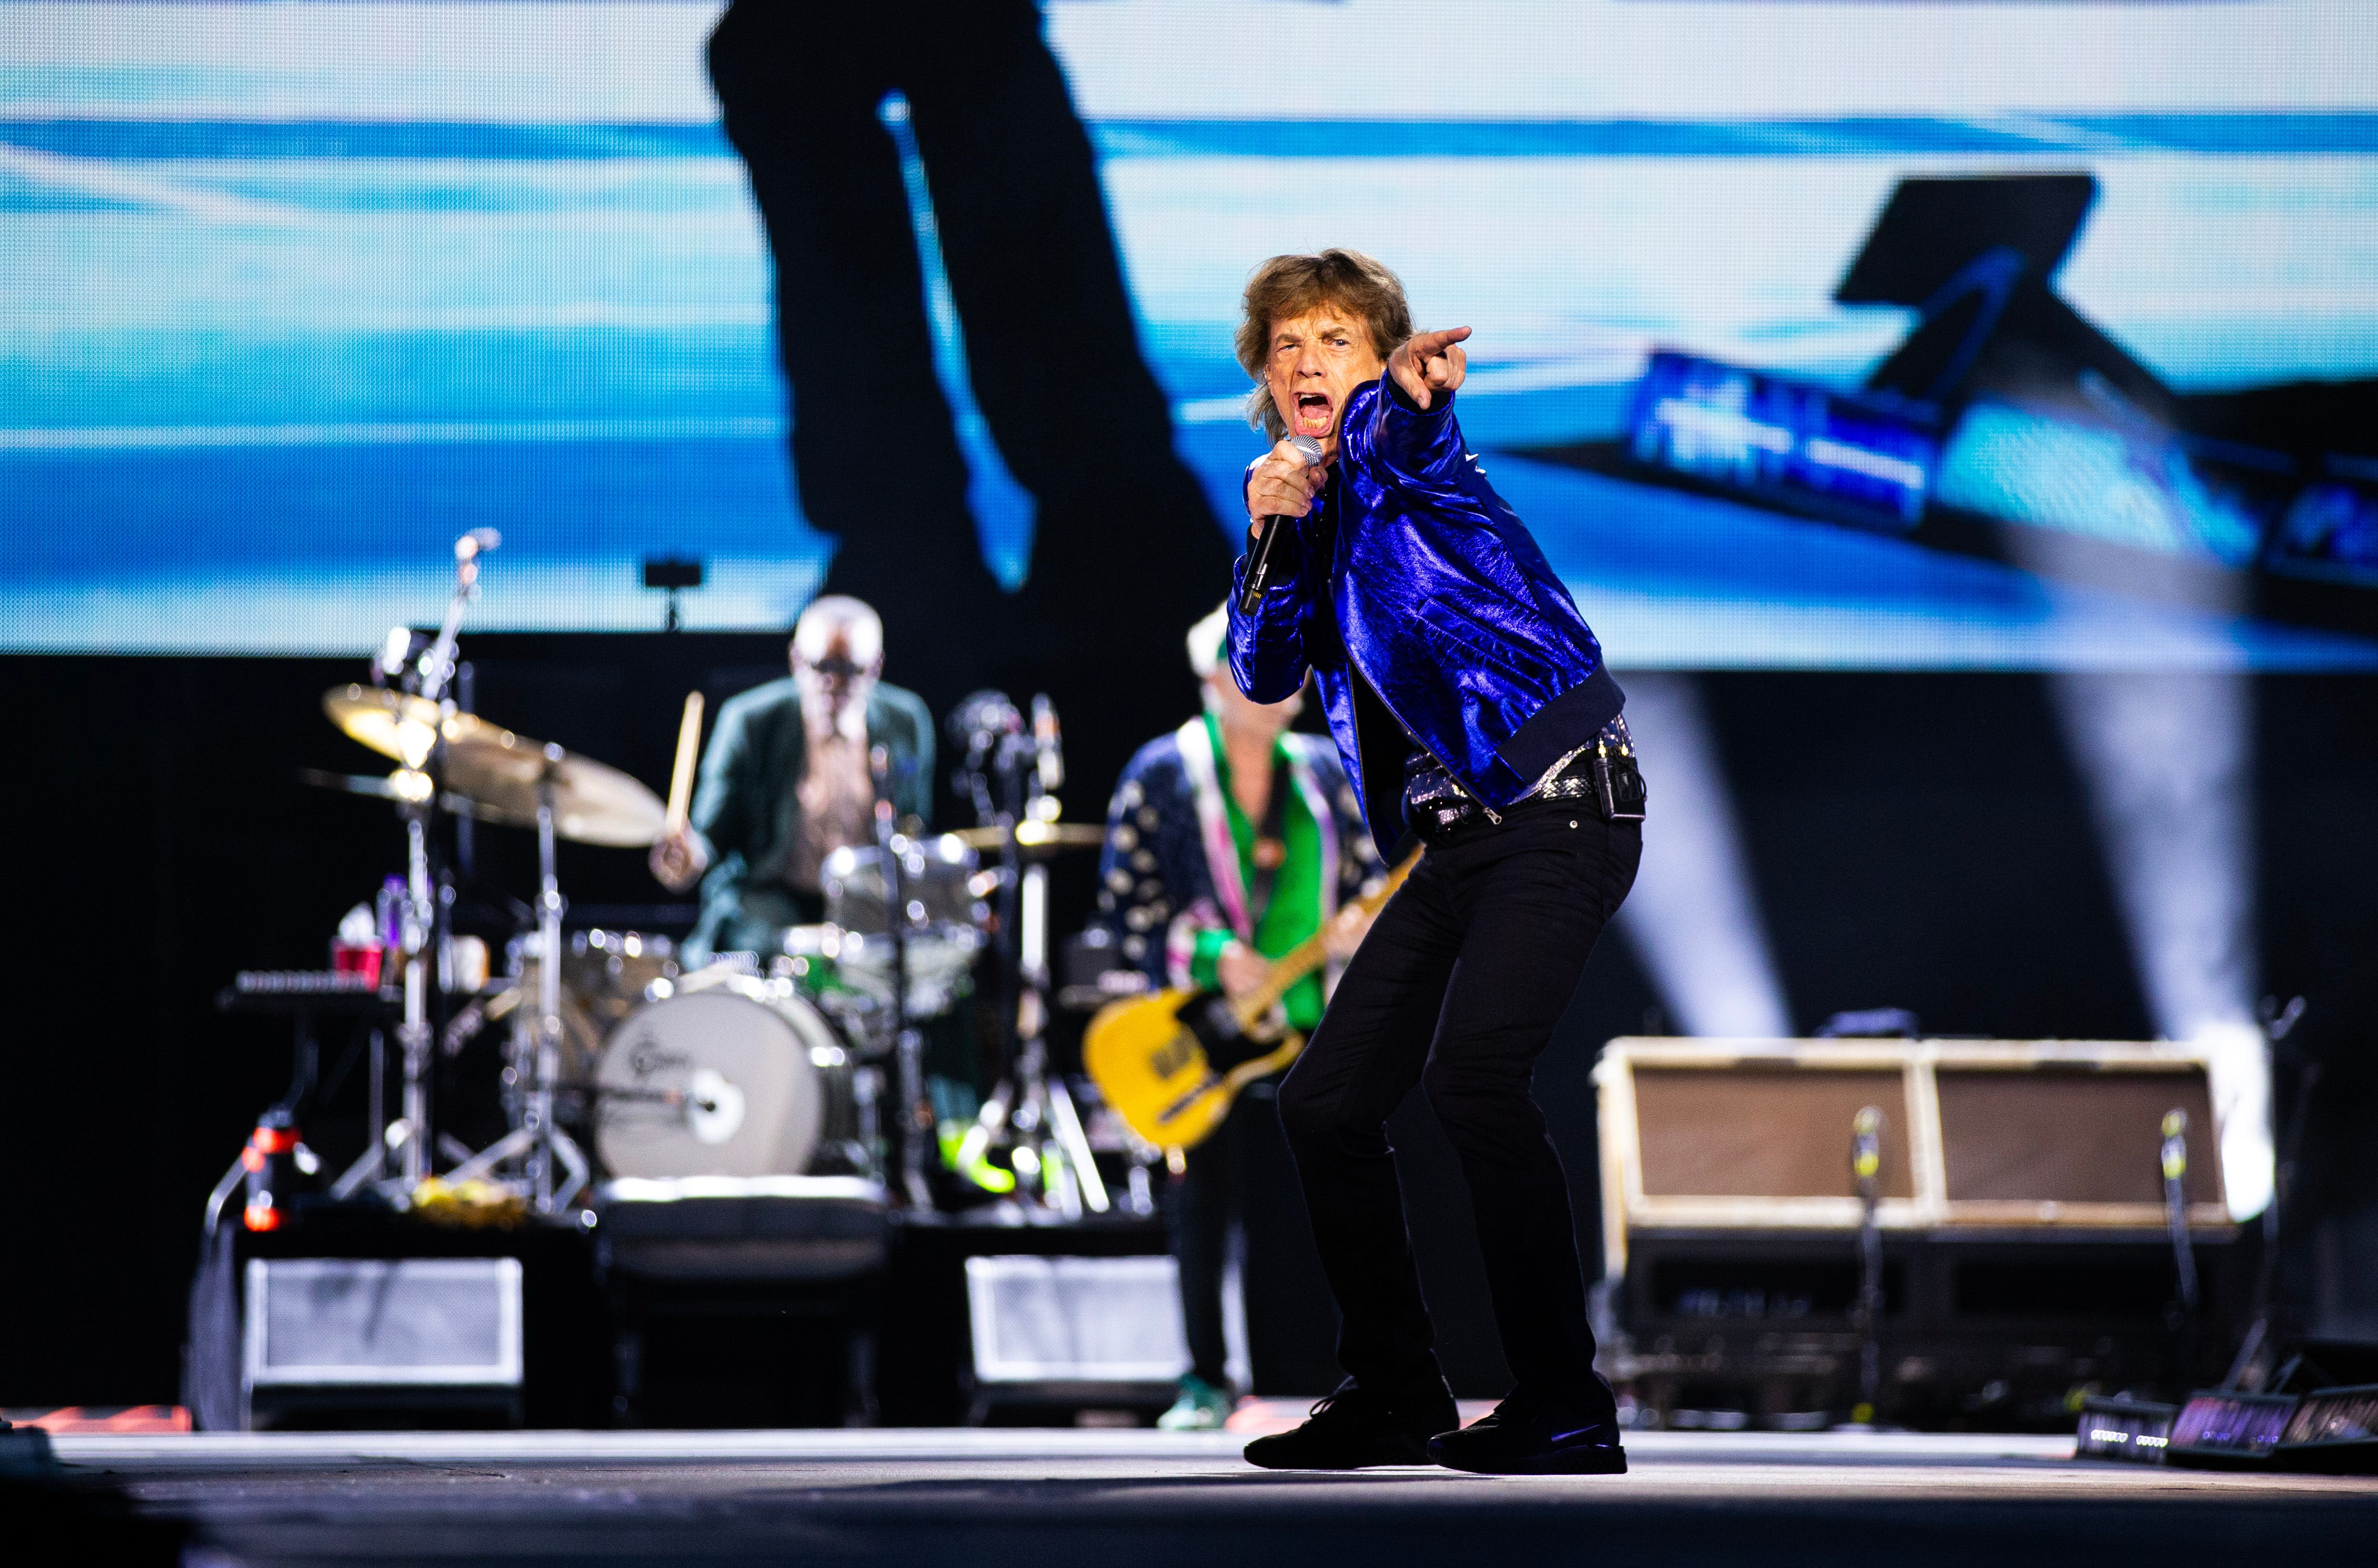 New Jersey woman celebrates 269th time seeing Rolling Stones at Thunder Ridge concert